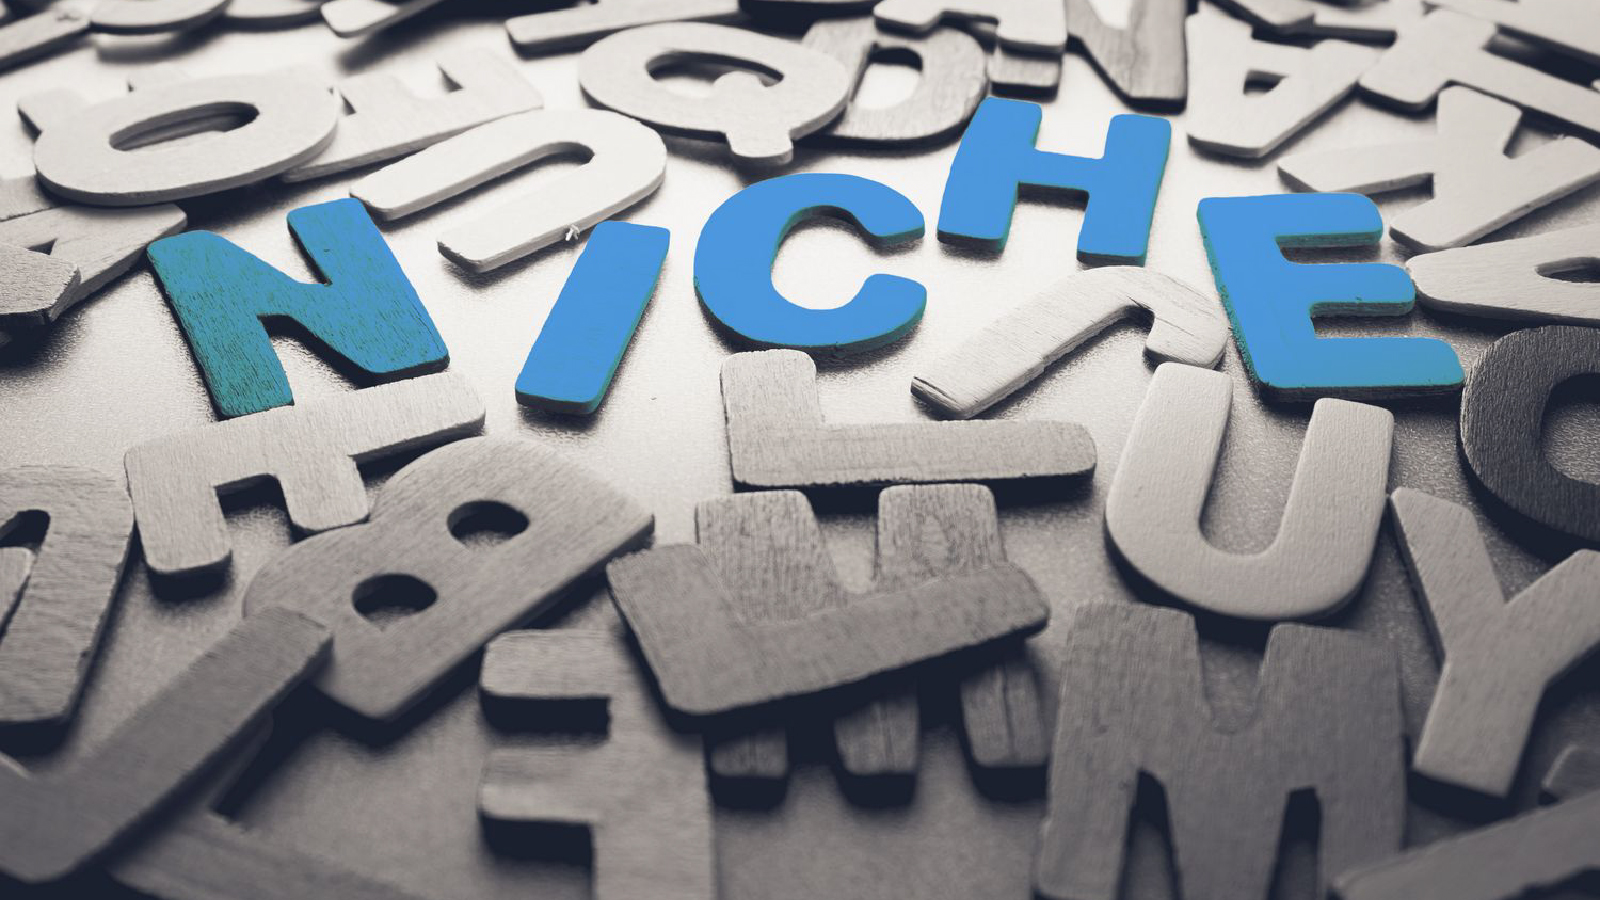 scattered wood letters with the word 'niche' written in them